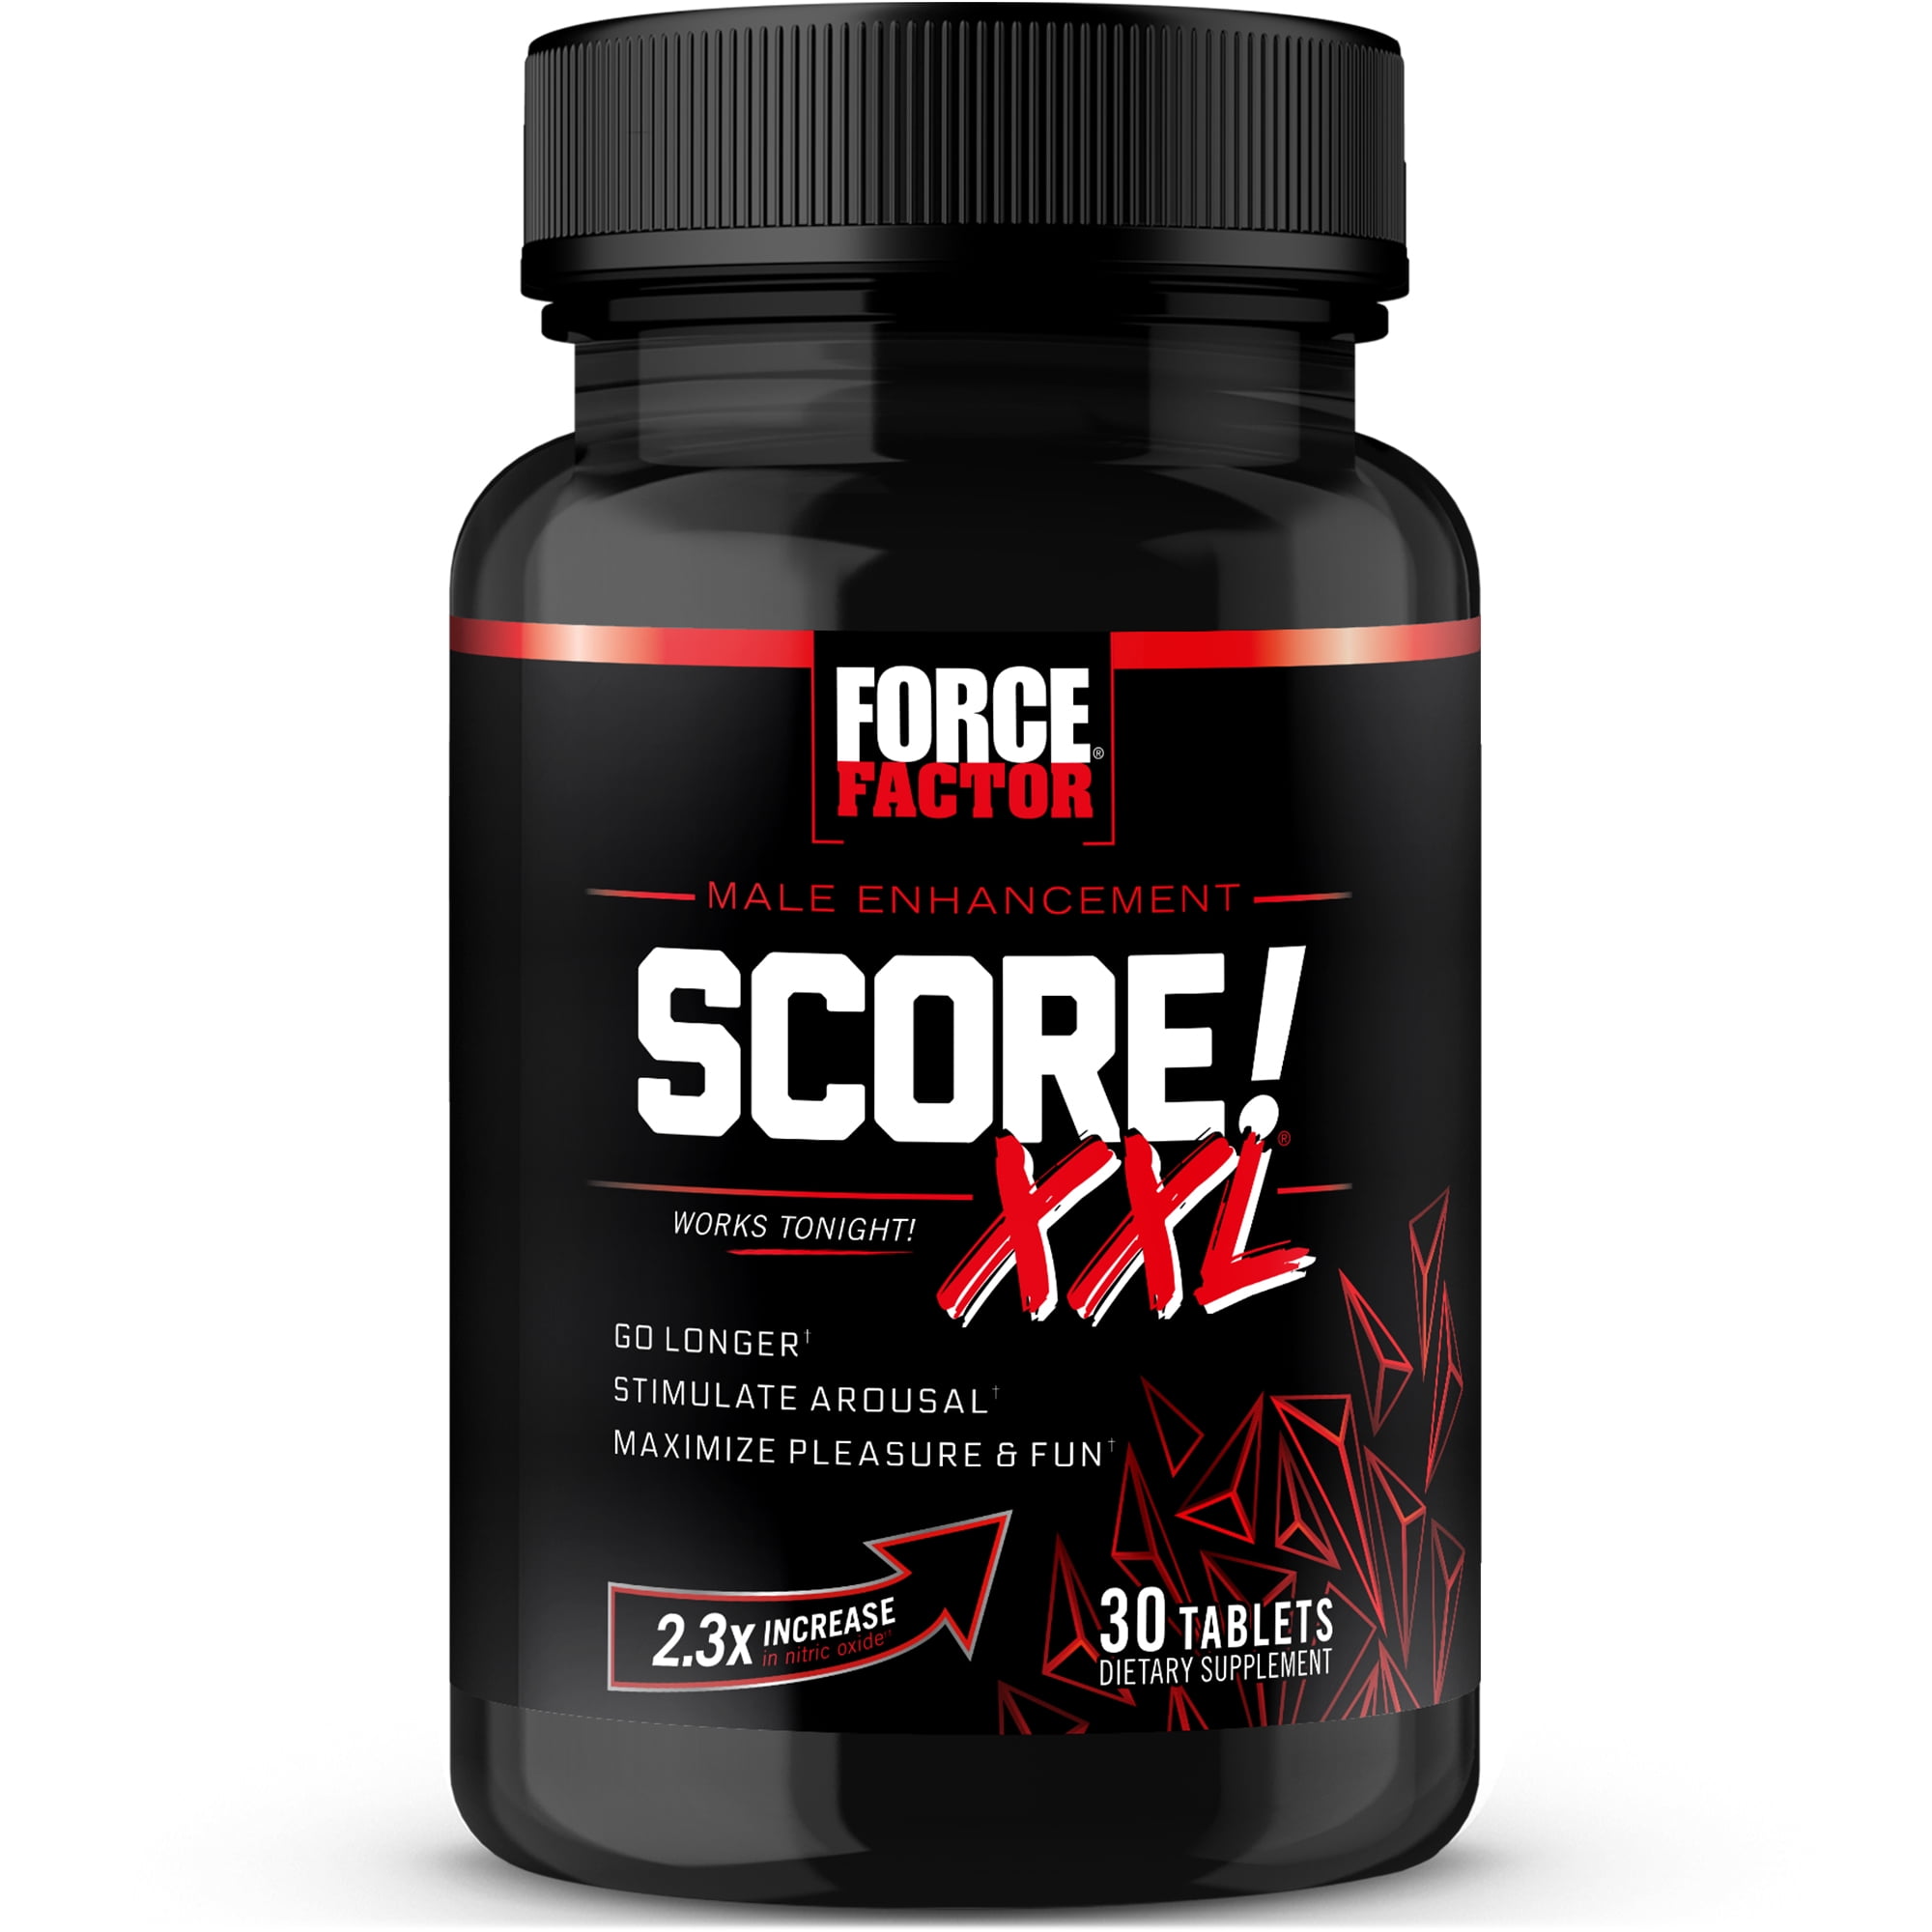 Force Factor Score! XXL Nitric Oxide Booster Supplement for Men with L-Citrulline, Black Maca, and Tribulus to Stimulate Arousal, Increase Stamina, and Support Blood Flow, 30 Tablets